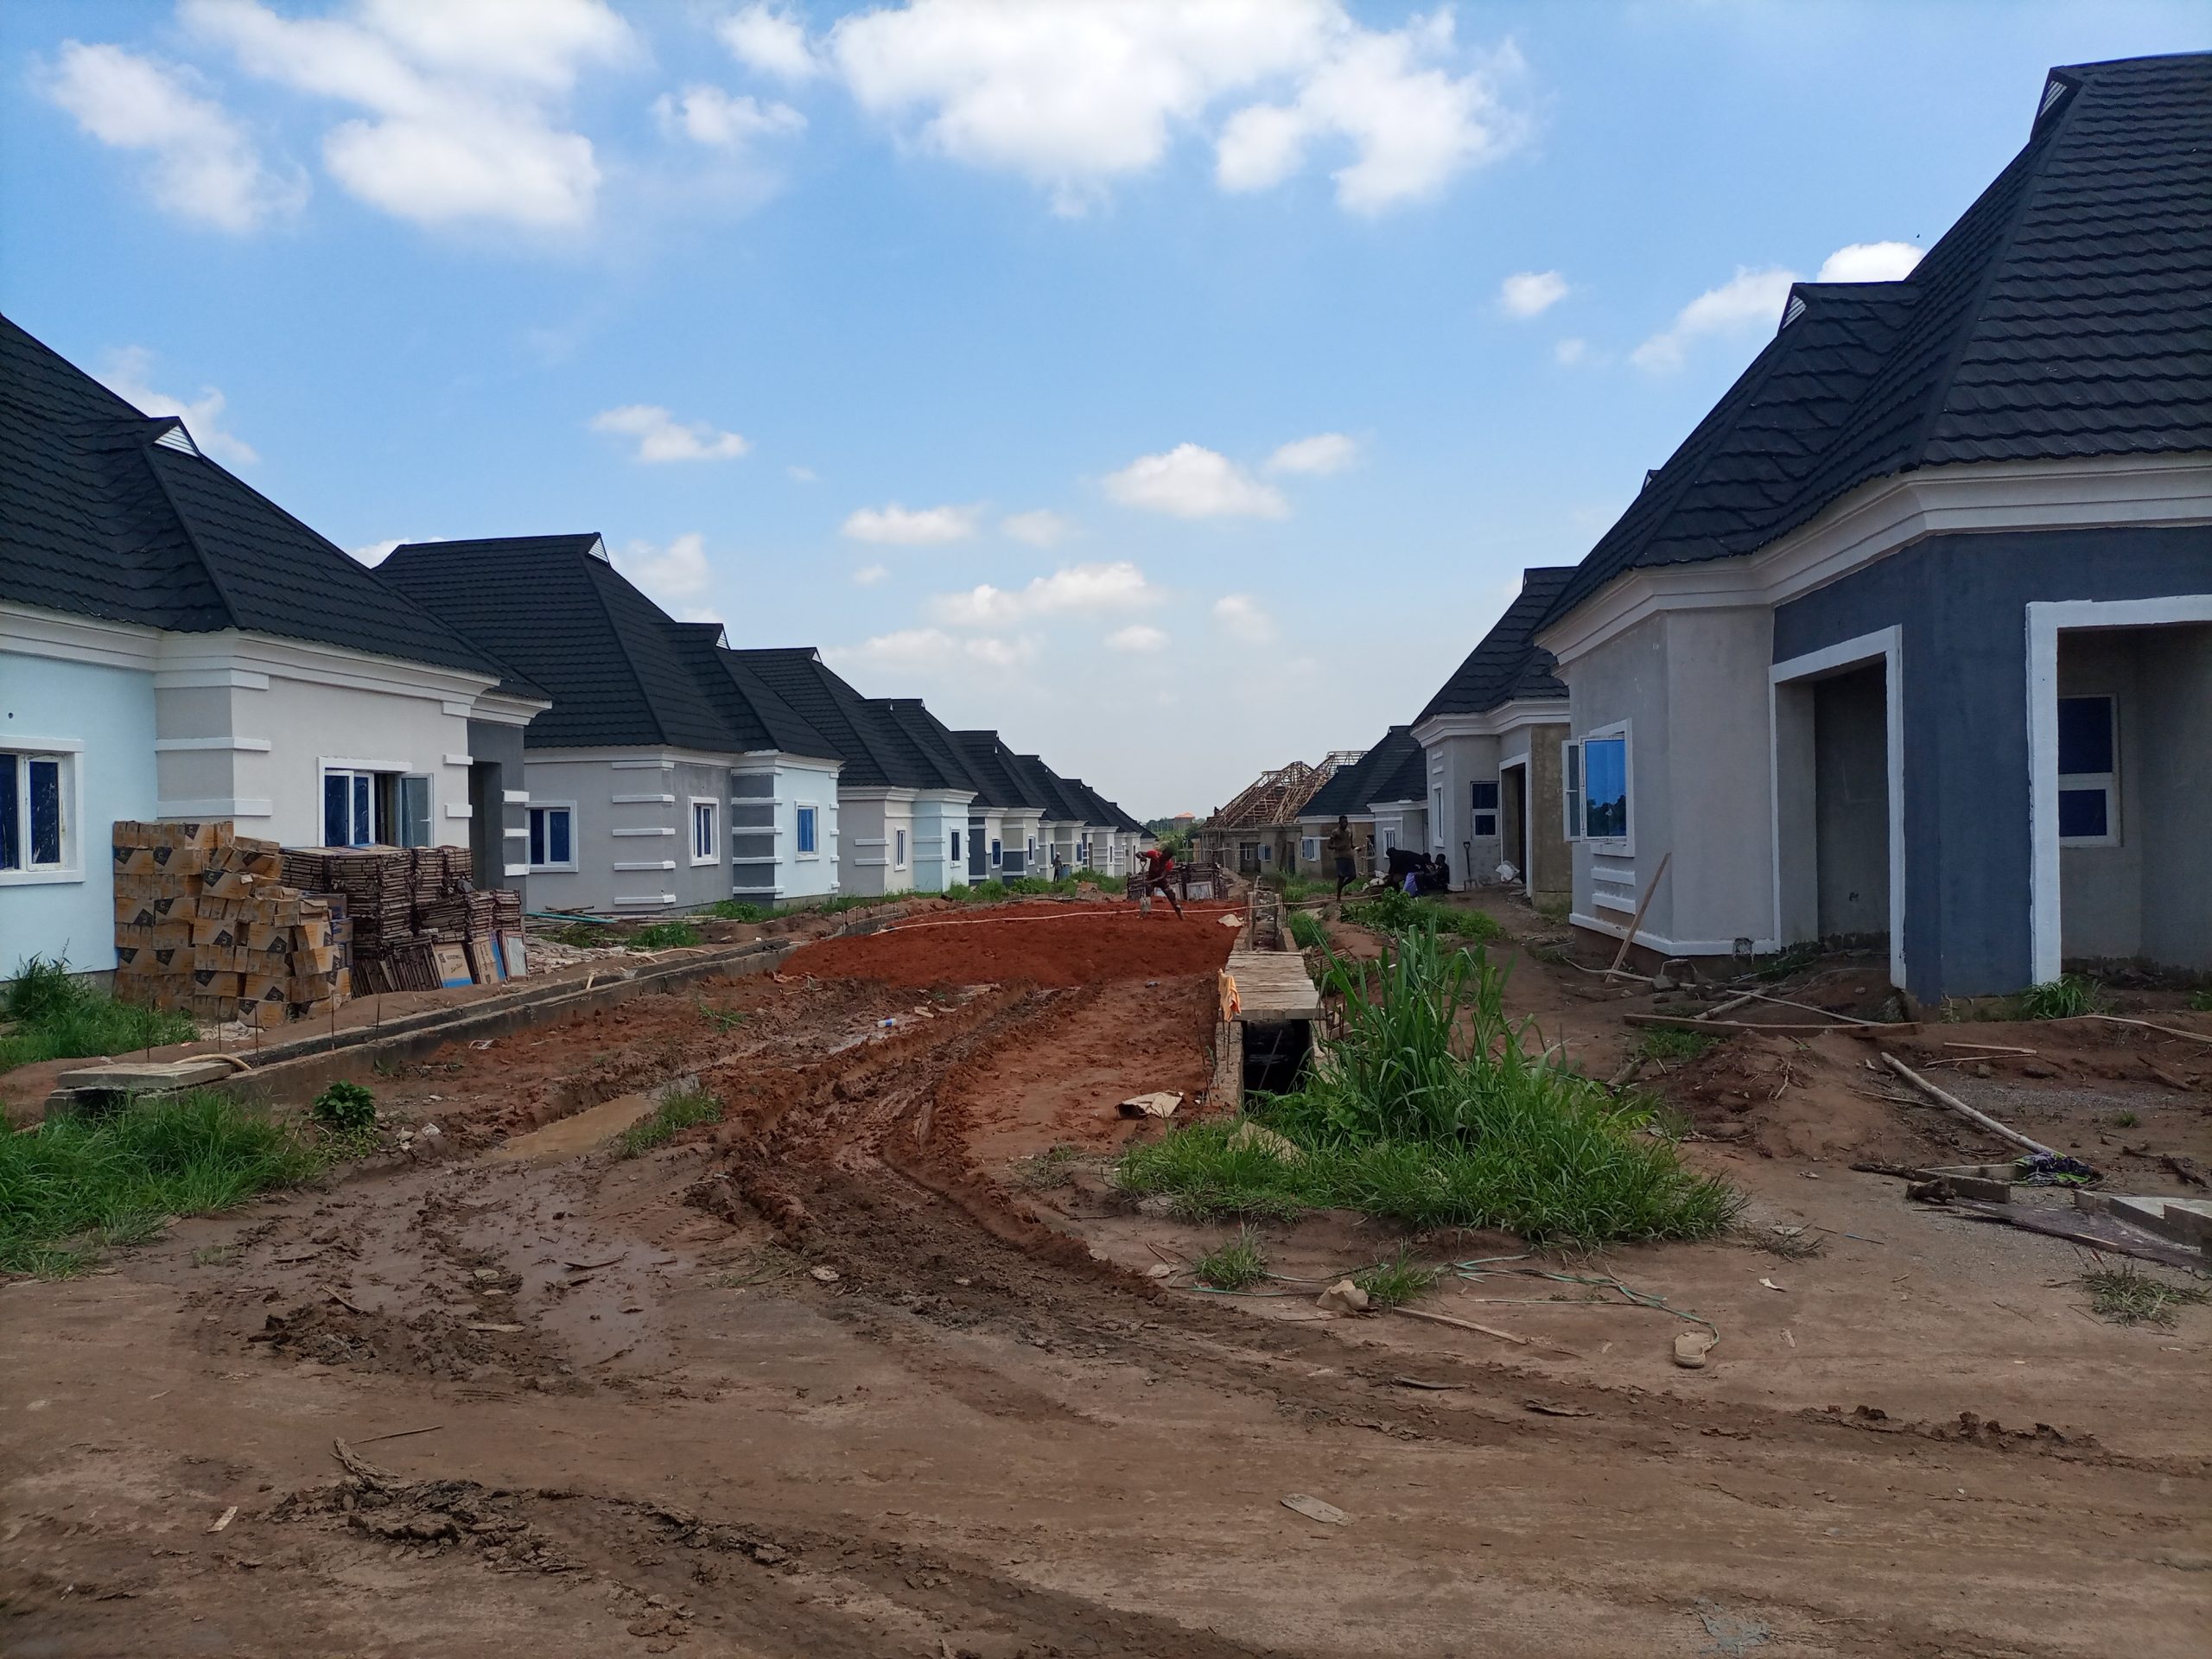 3 Bedroom Bungalow For Sale in Bluestone Estate, Mowe, with monthly installmental payment